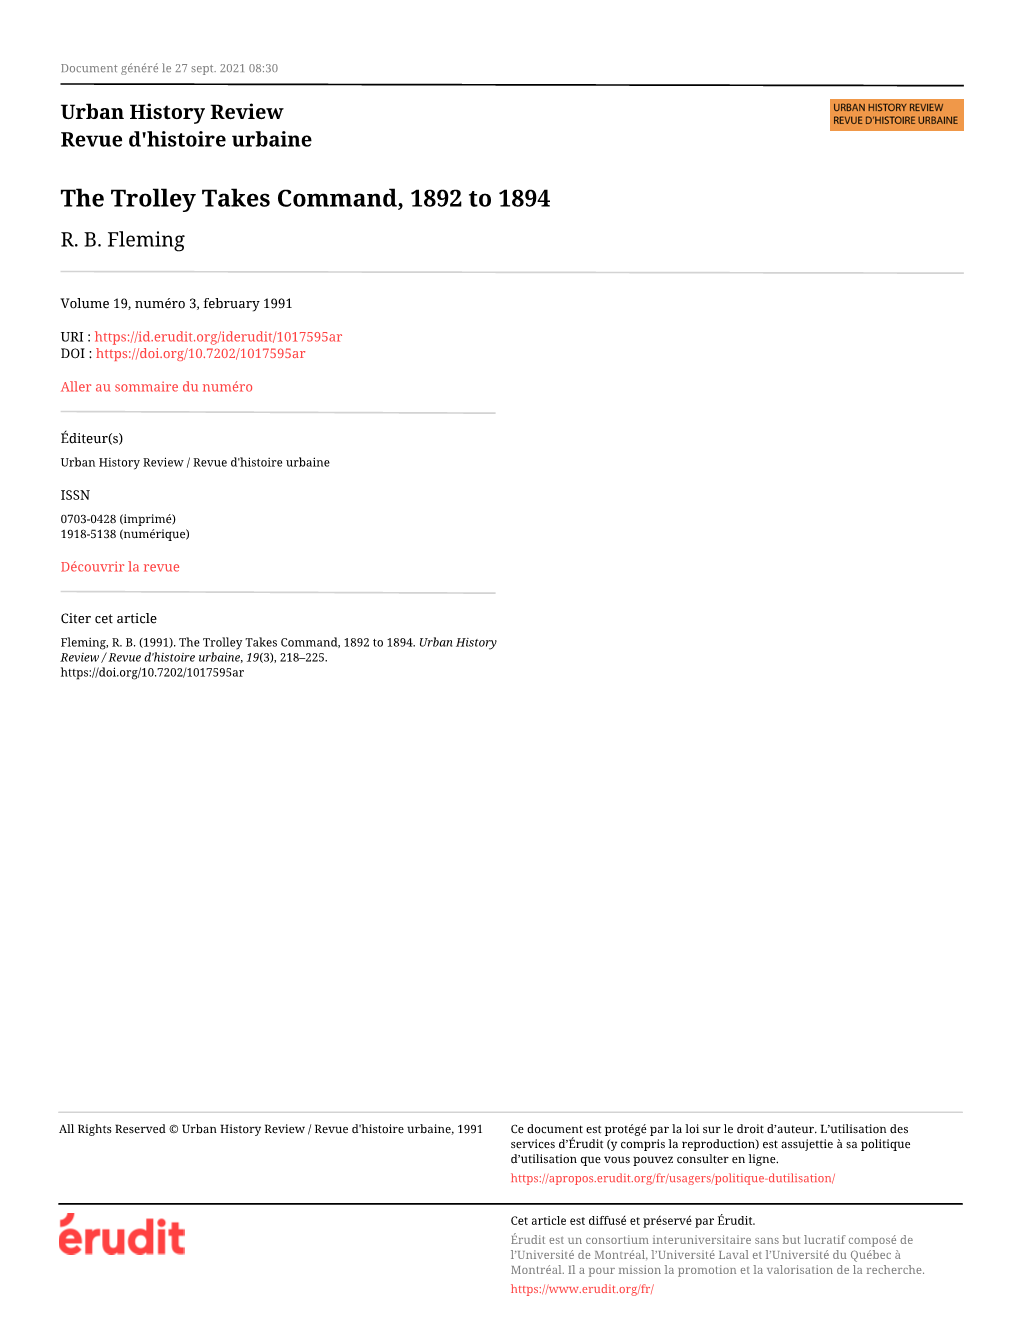 The Trolley Takes Command, 1892 to 1894 R